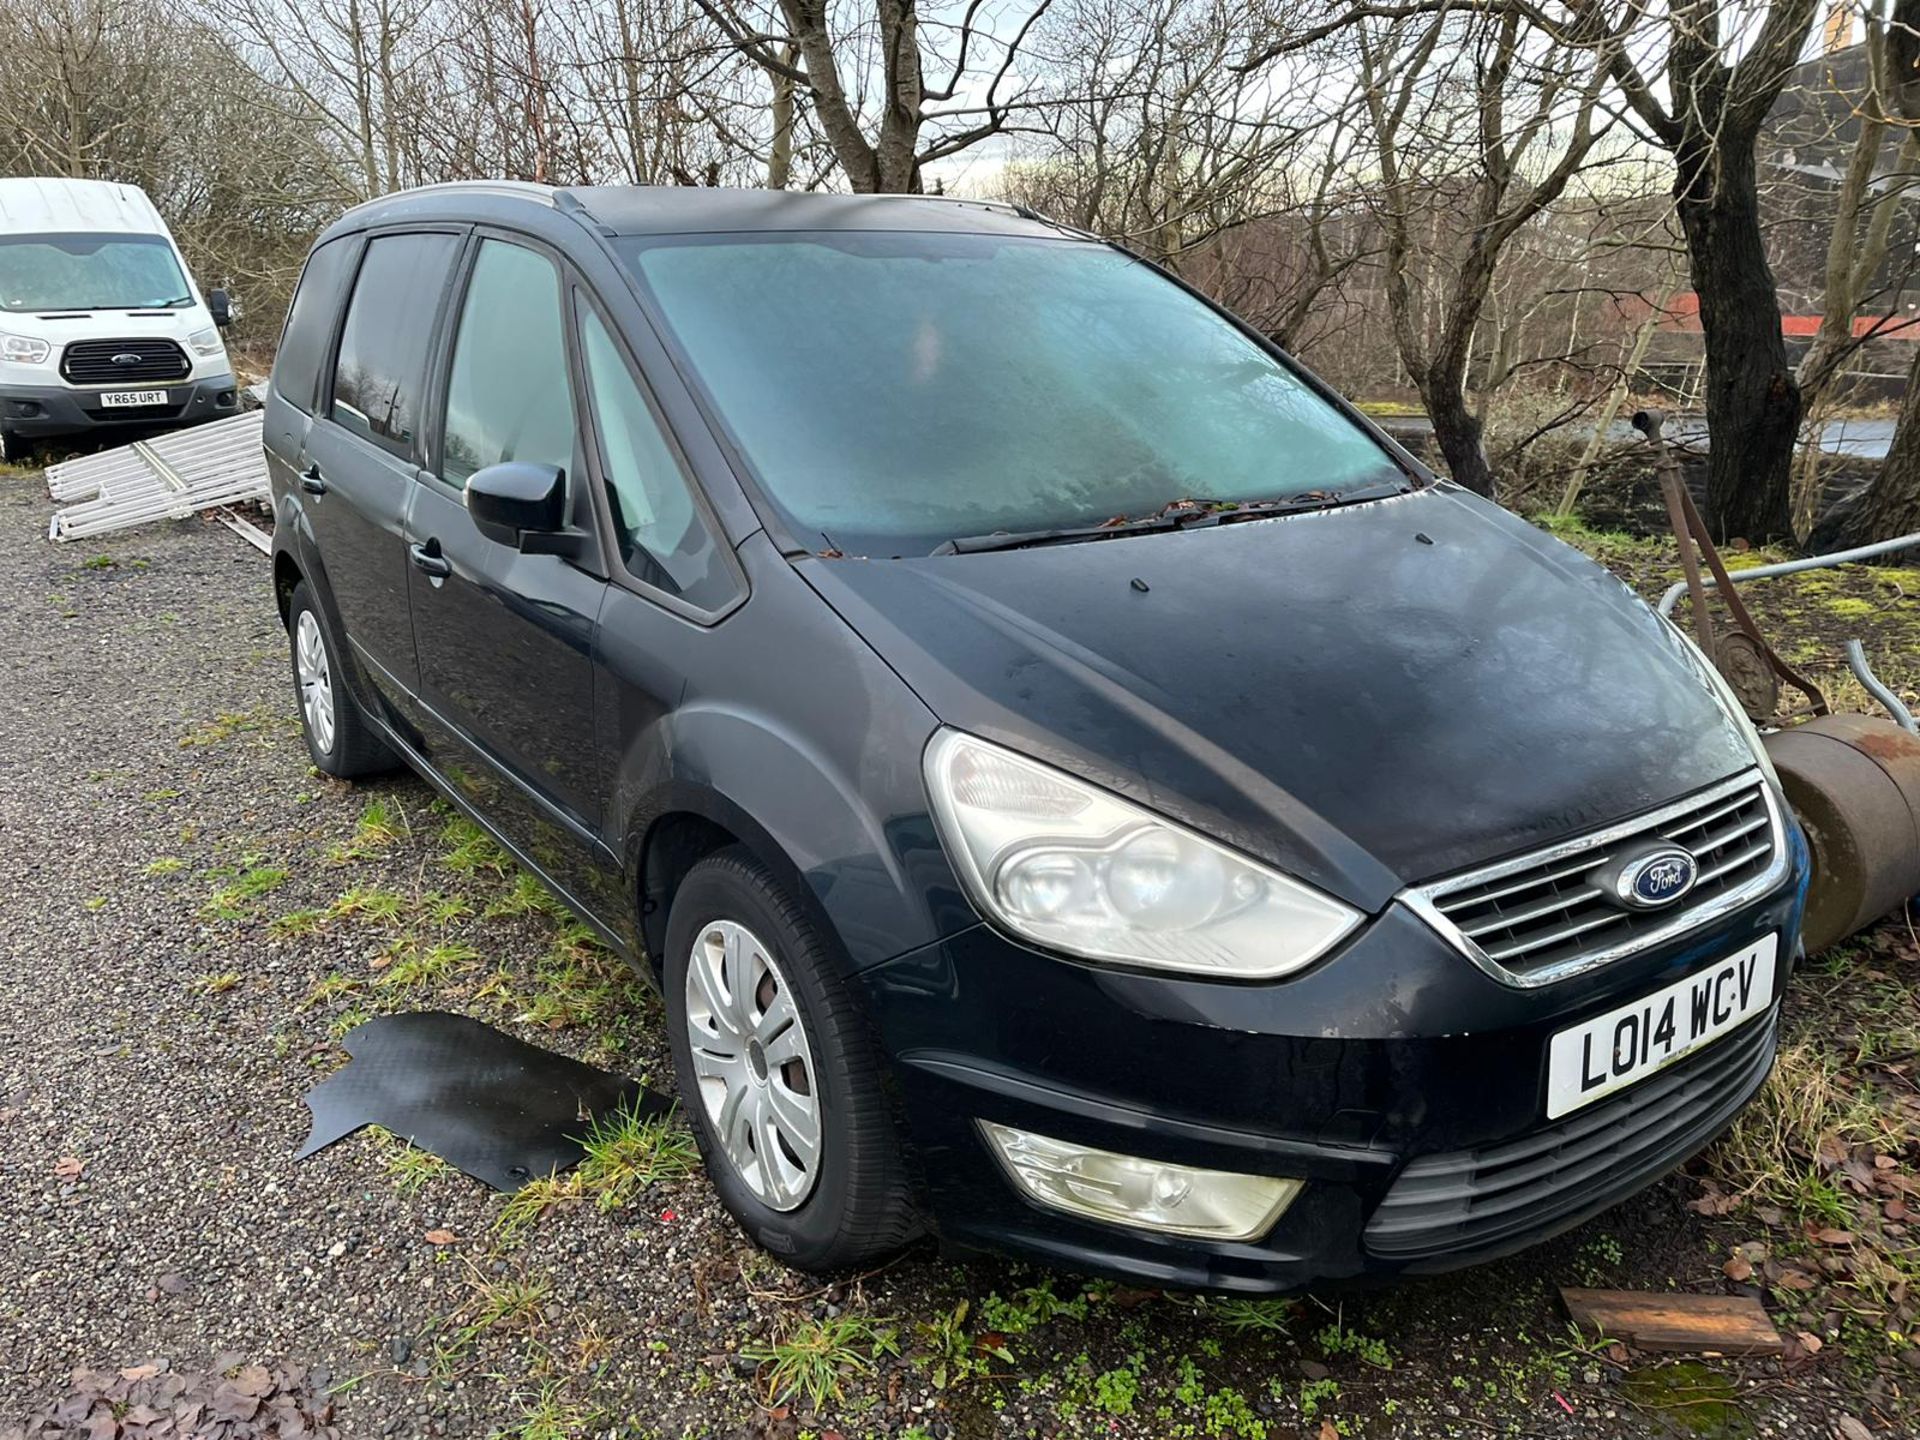 (NO VAT ON HAMMER) >>SPECIAL CLEARANCE<< 2014 FORD GALAXY ZETEC 2.0 TDCI - RESTORE & REVIVE!